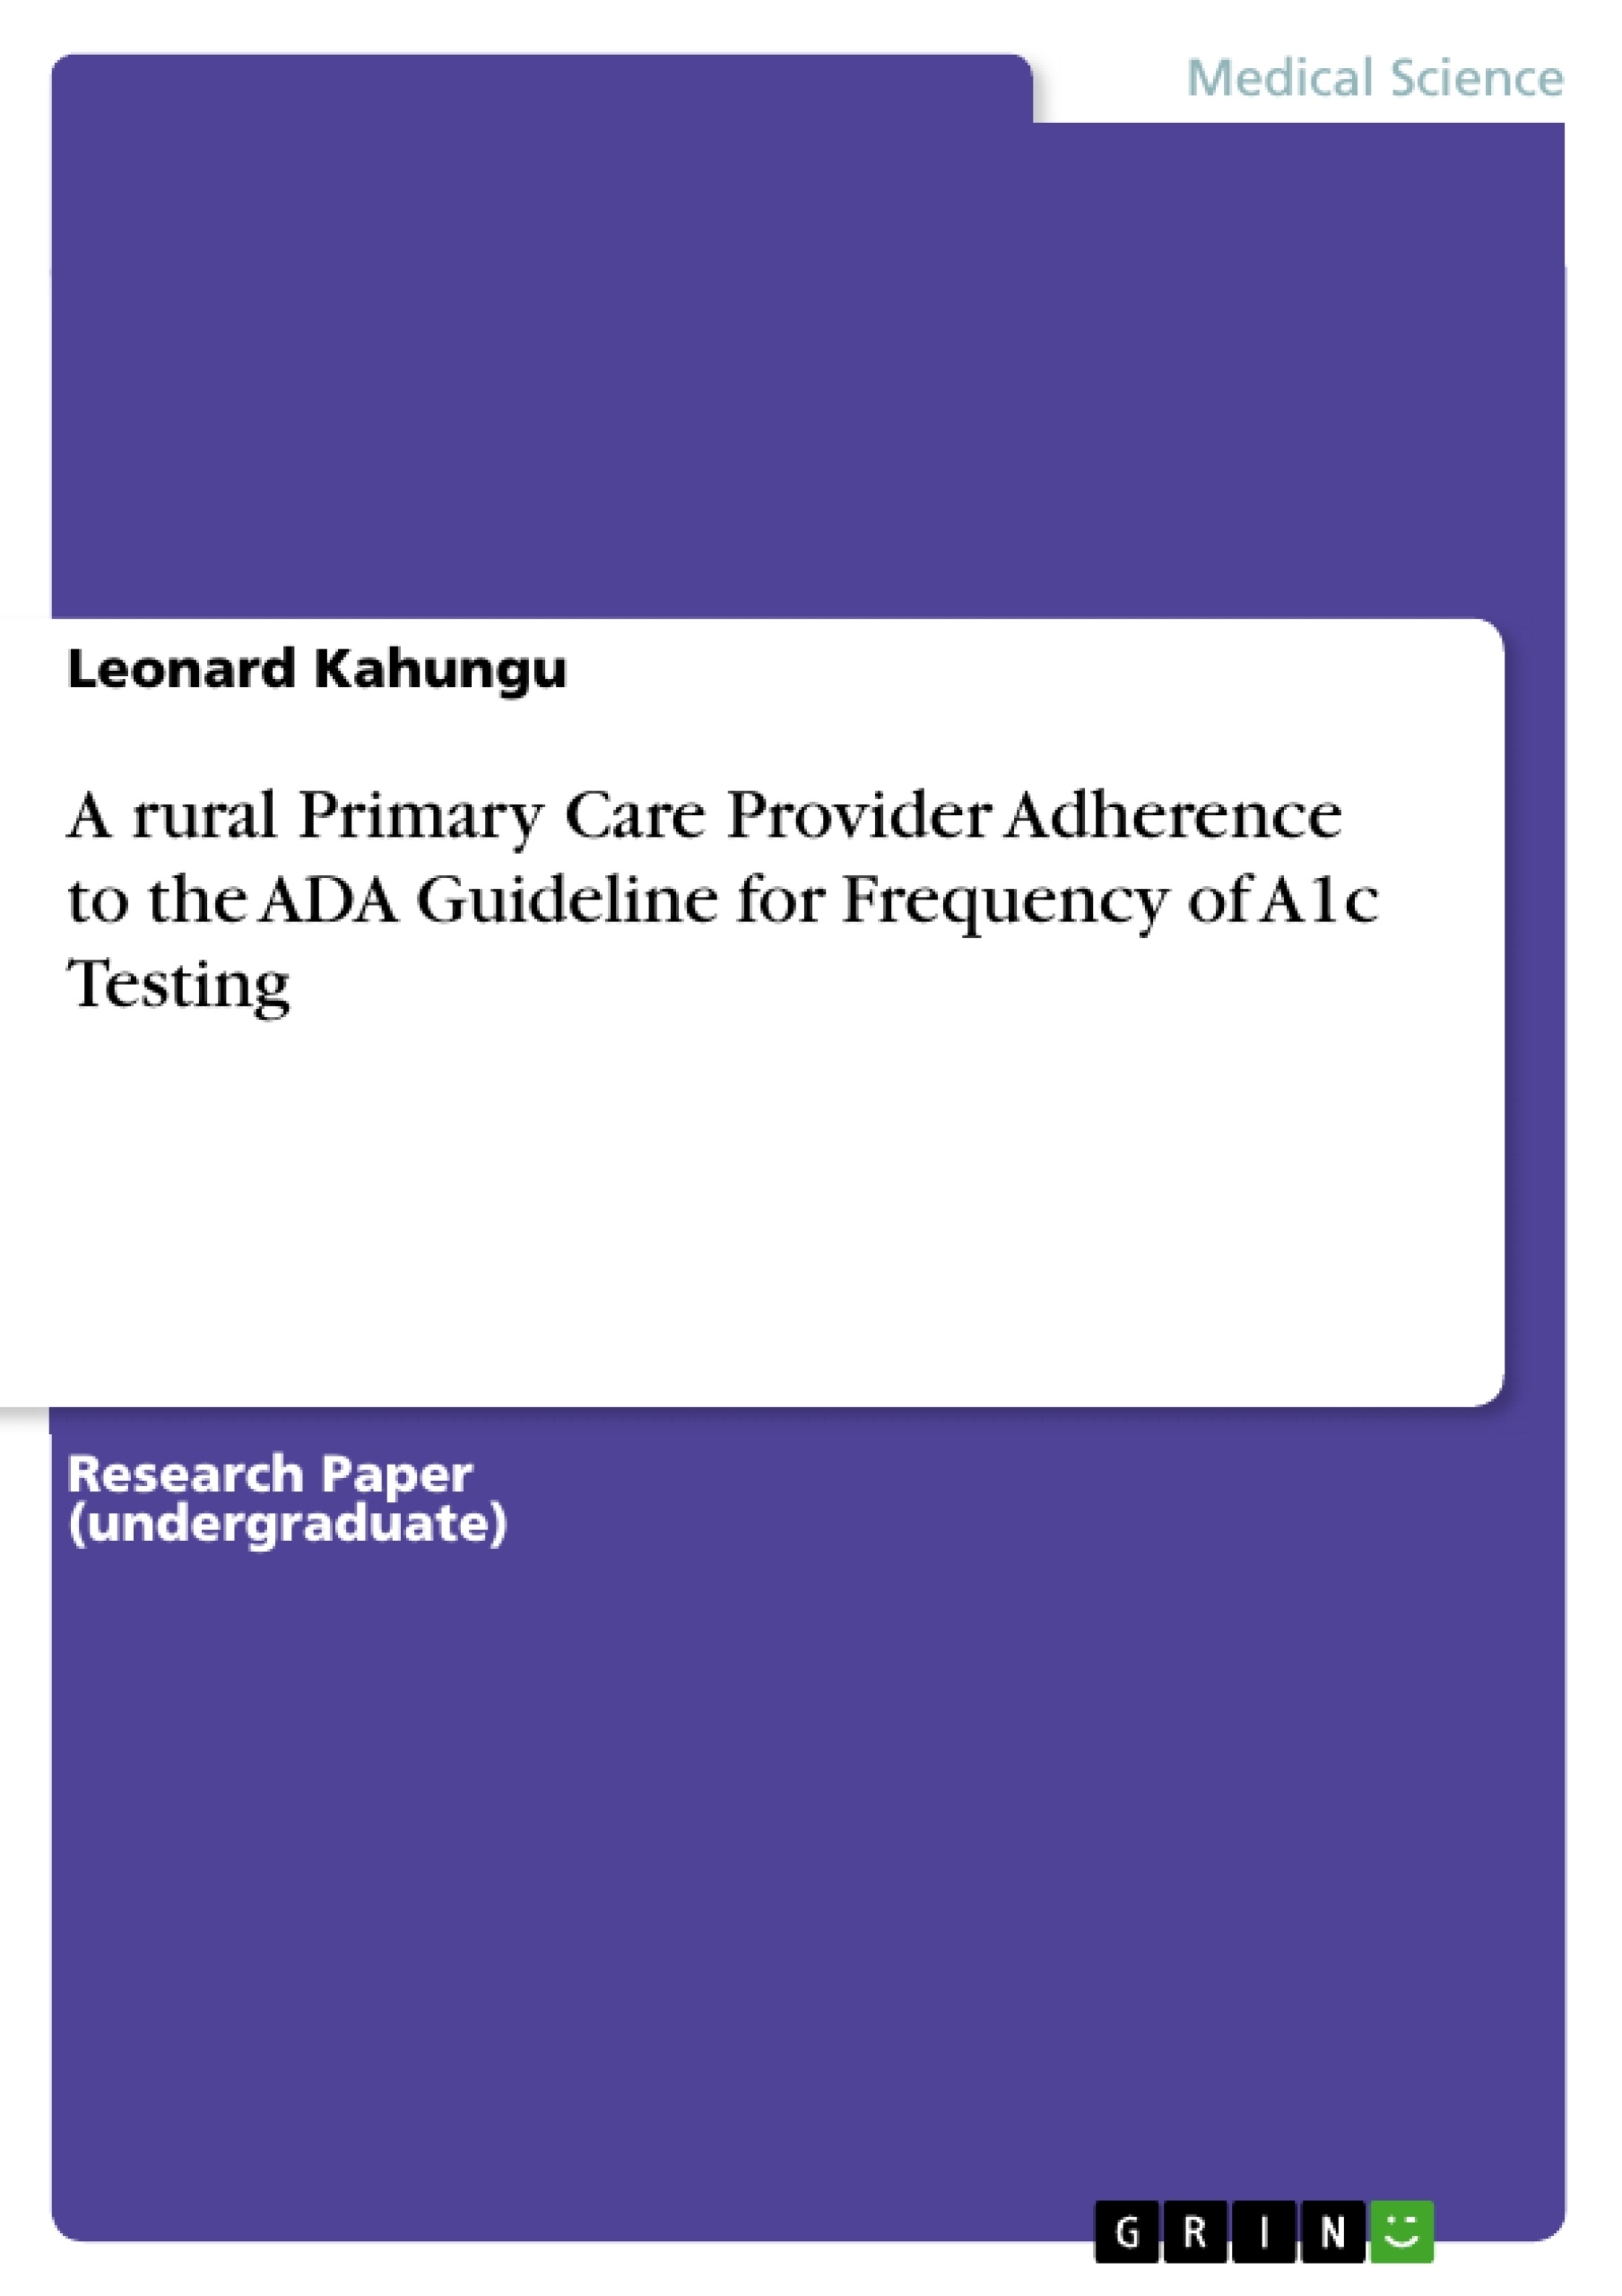 Título: A rural Primary Care Provider Adherence to the ADA Guideline for Frequency of A1c Testing